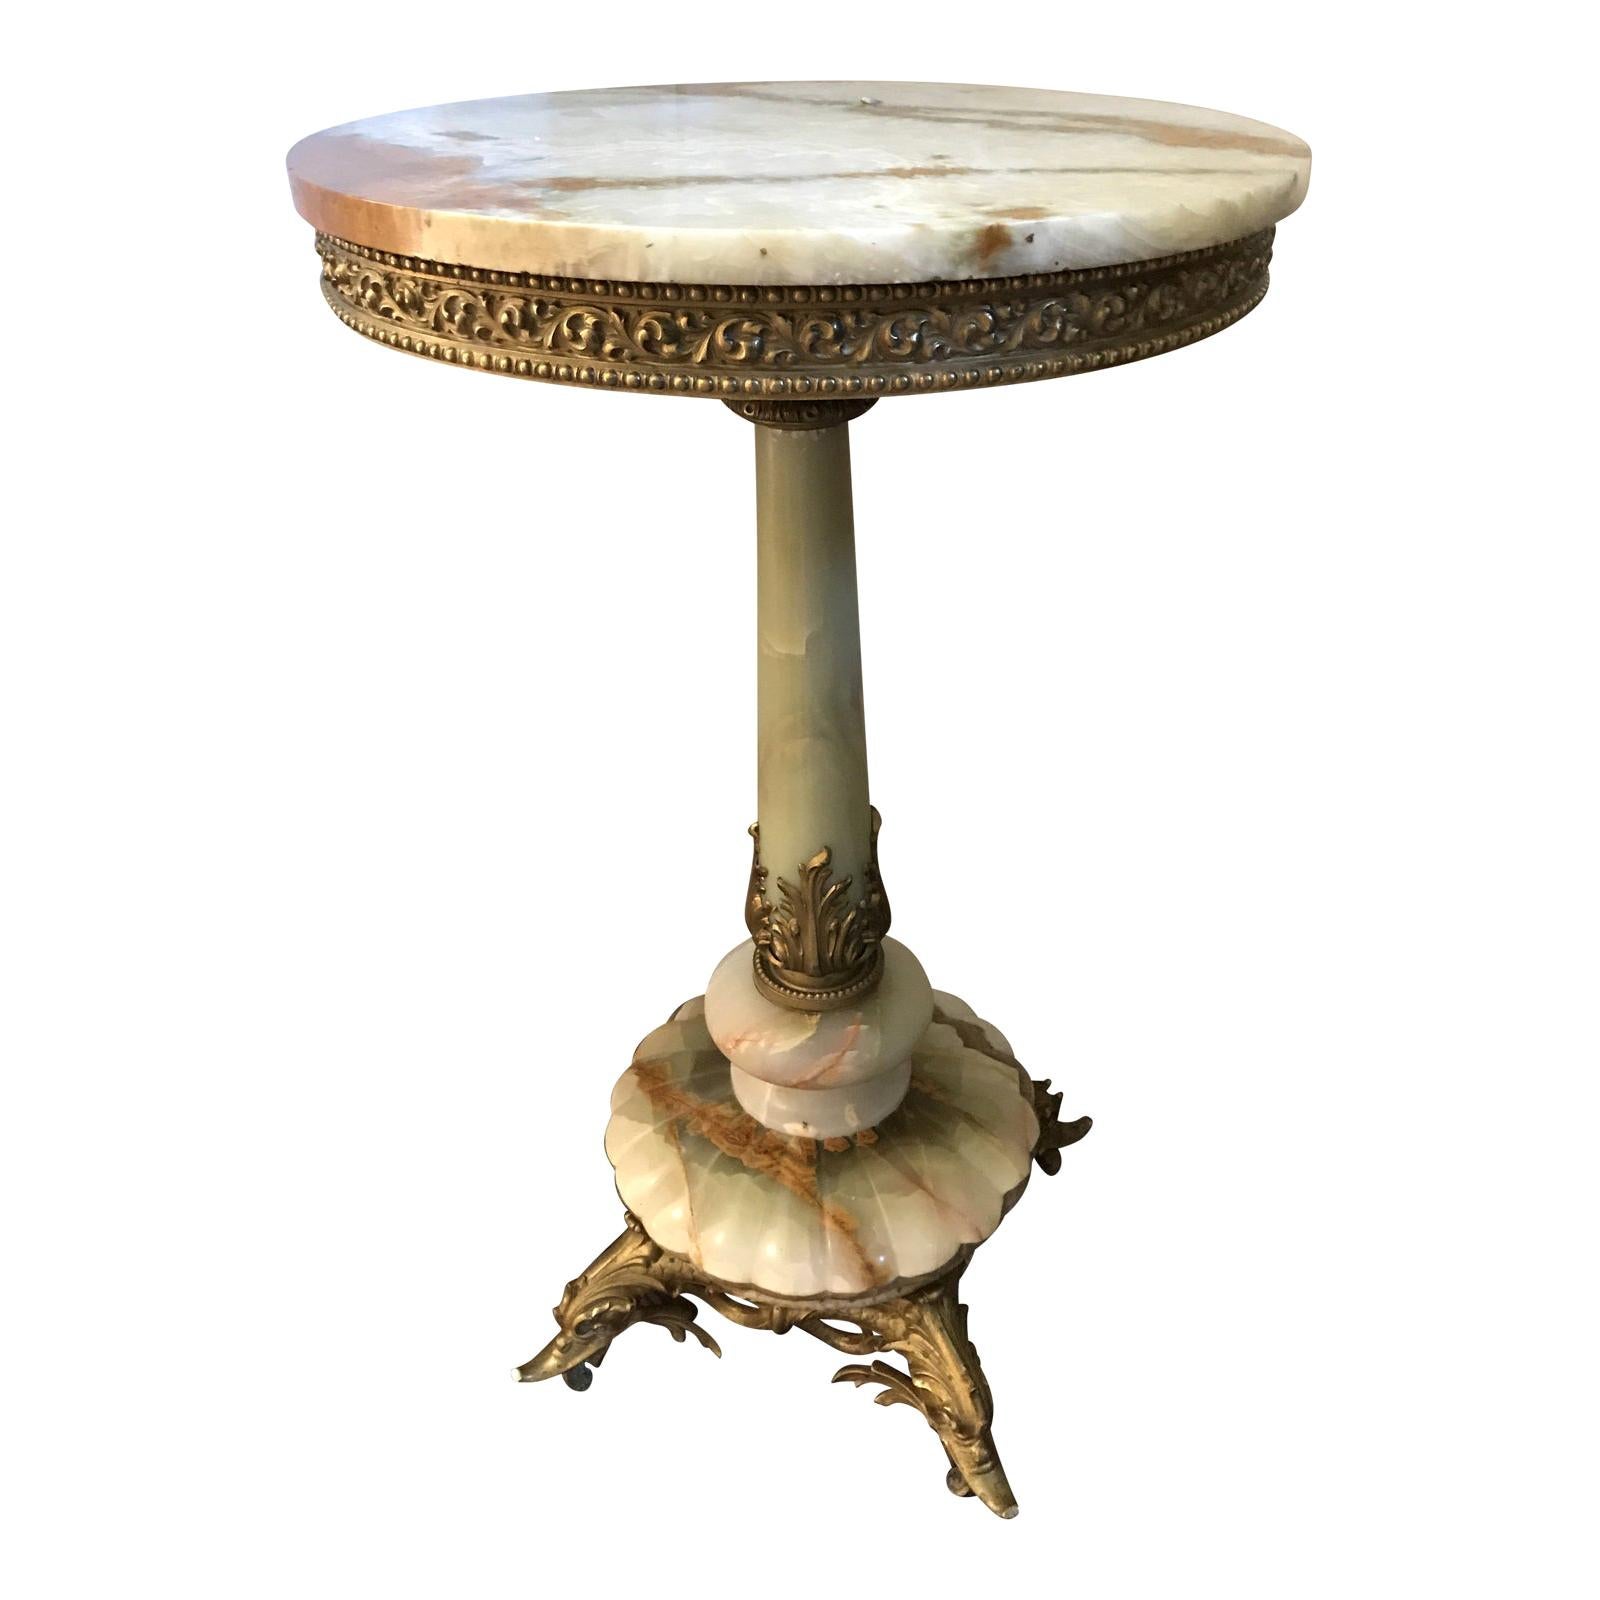 Extraordinary Round Onyx and Gilt Brass Empire Pedestal Side Table